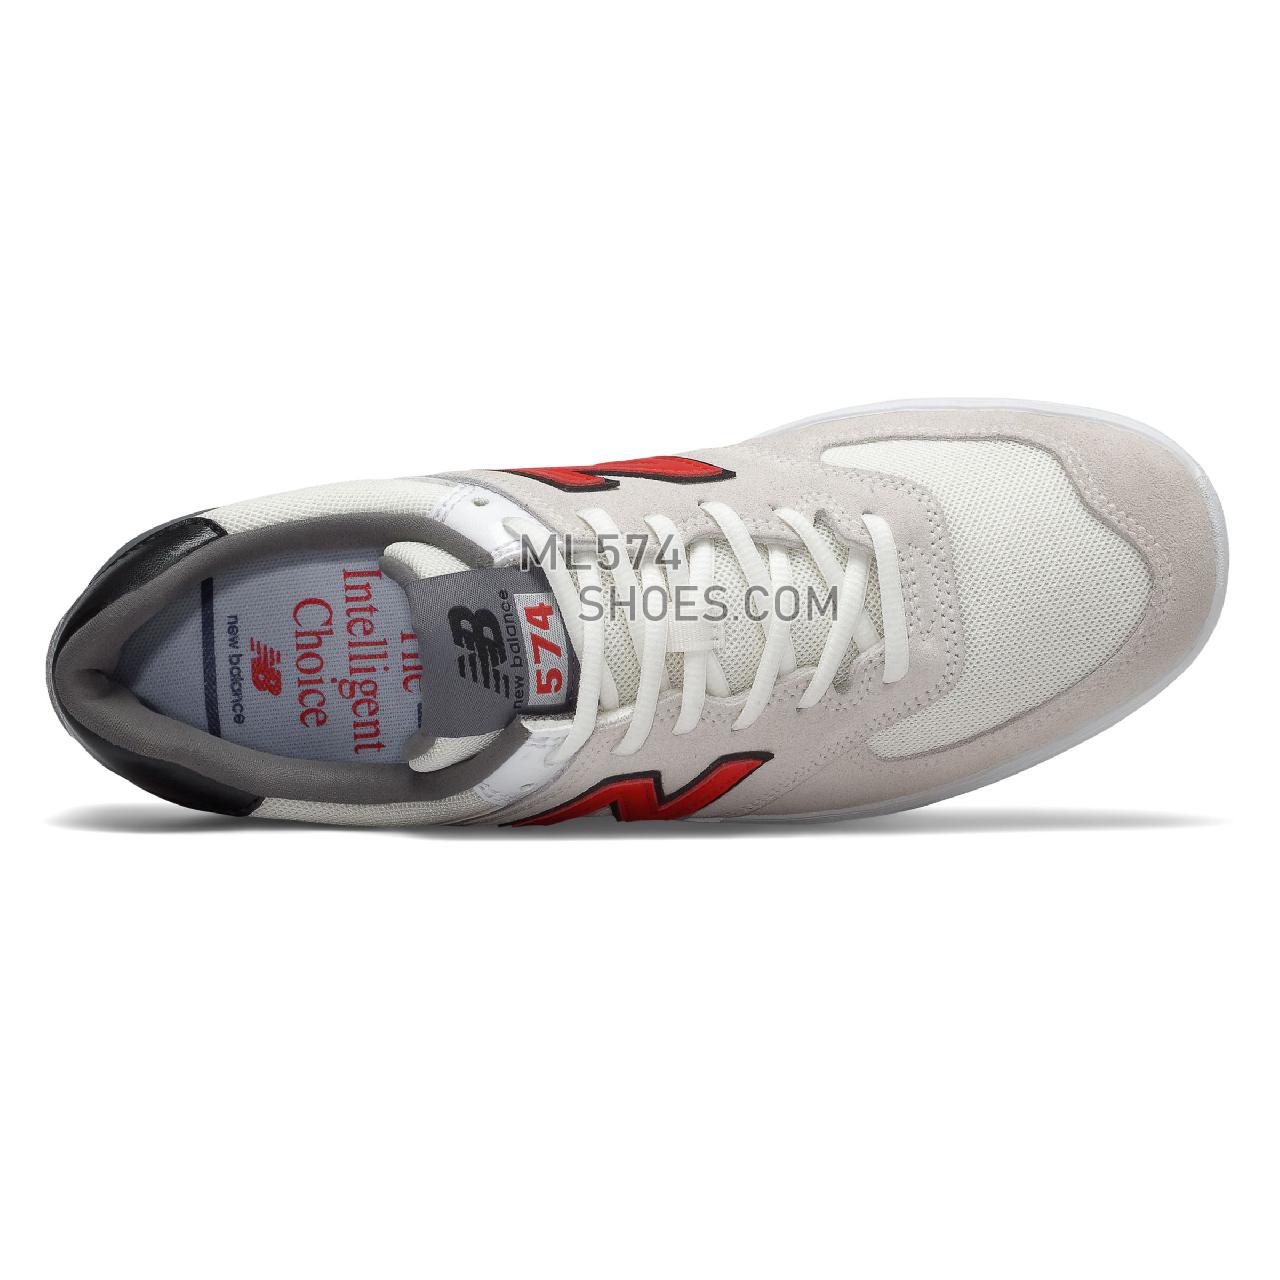 New Balance All Coasts 574 - Men's Court Classics - White with Red - AM574WHR